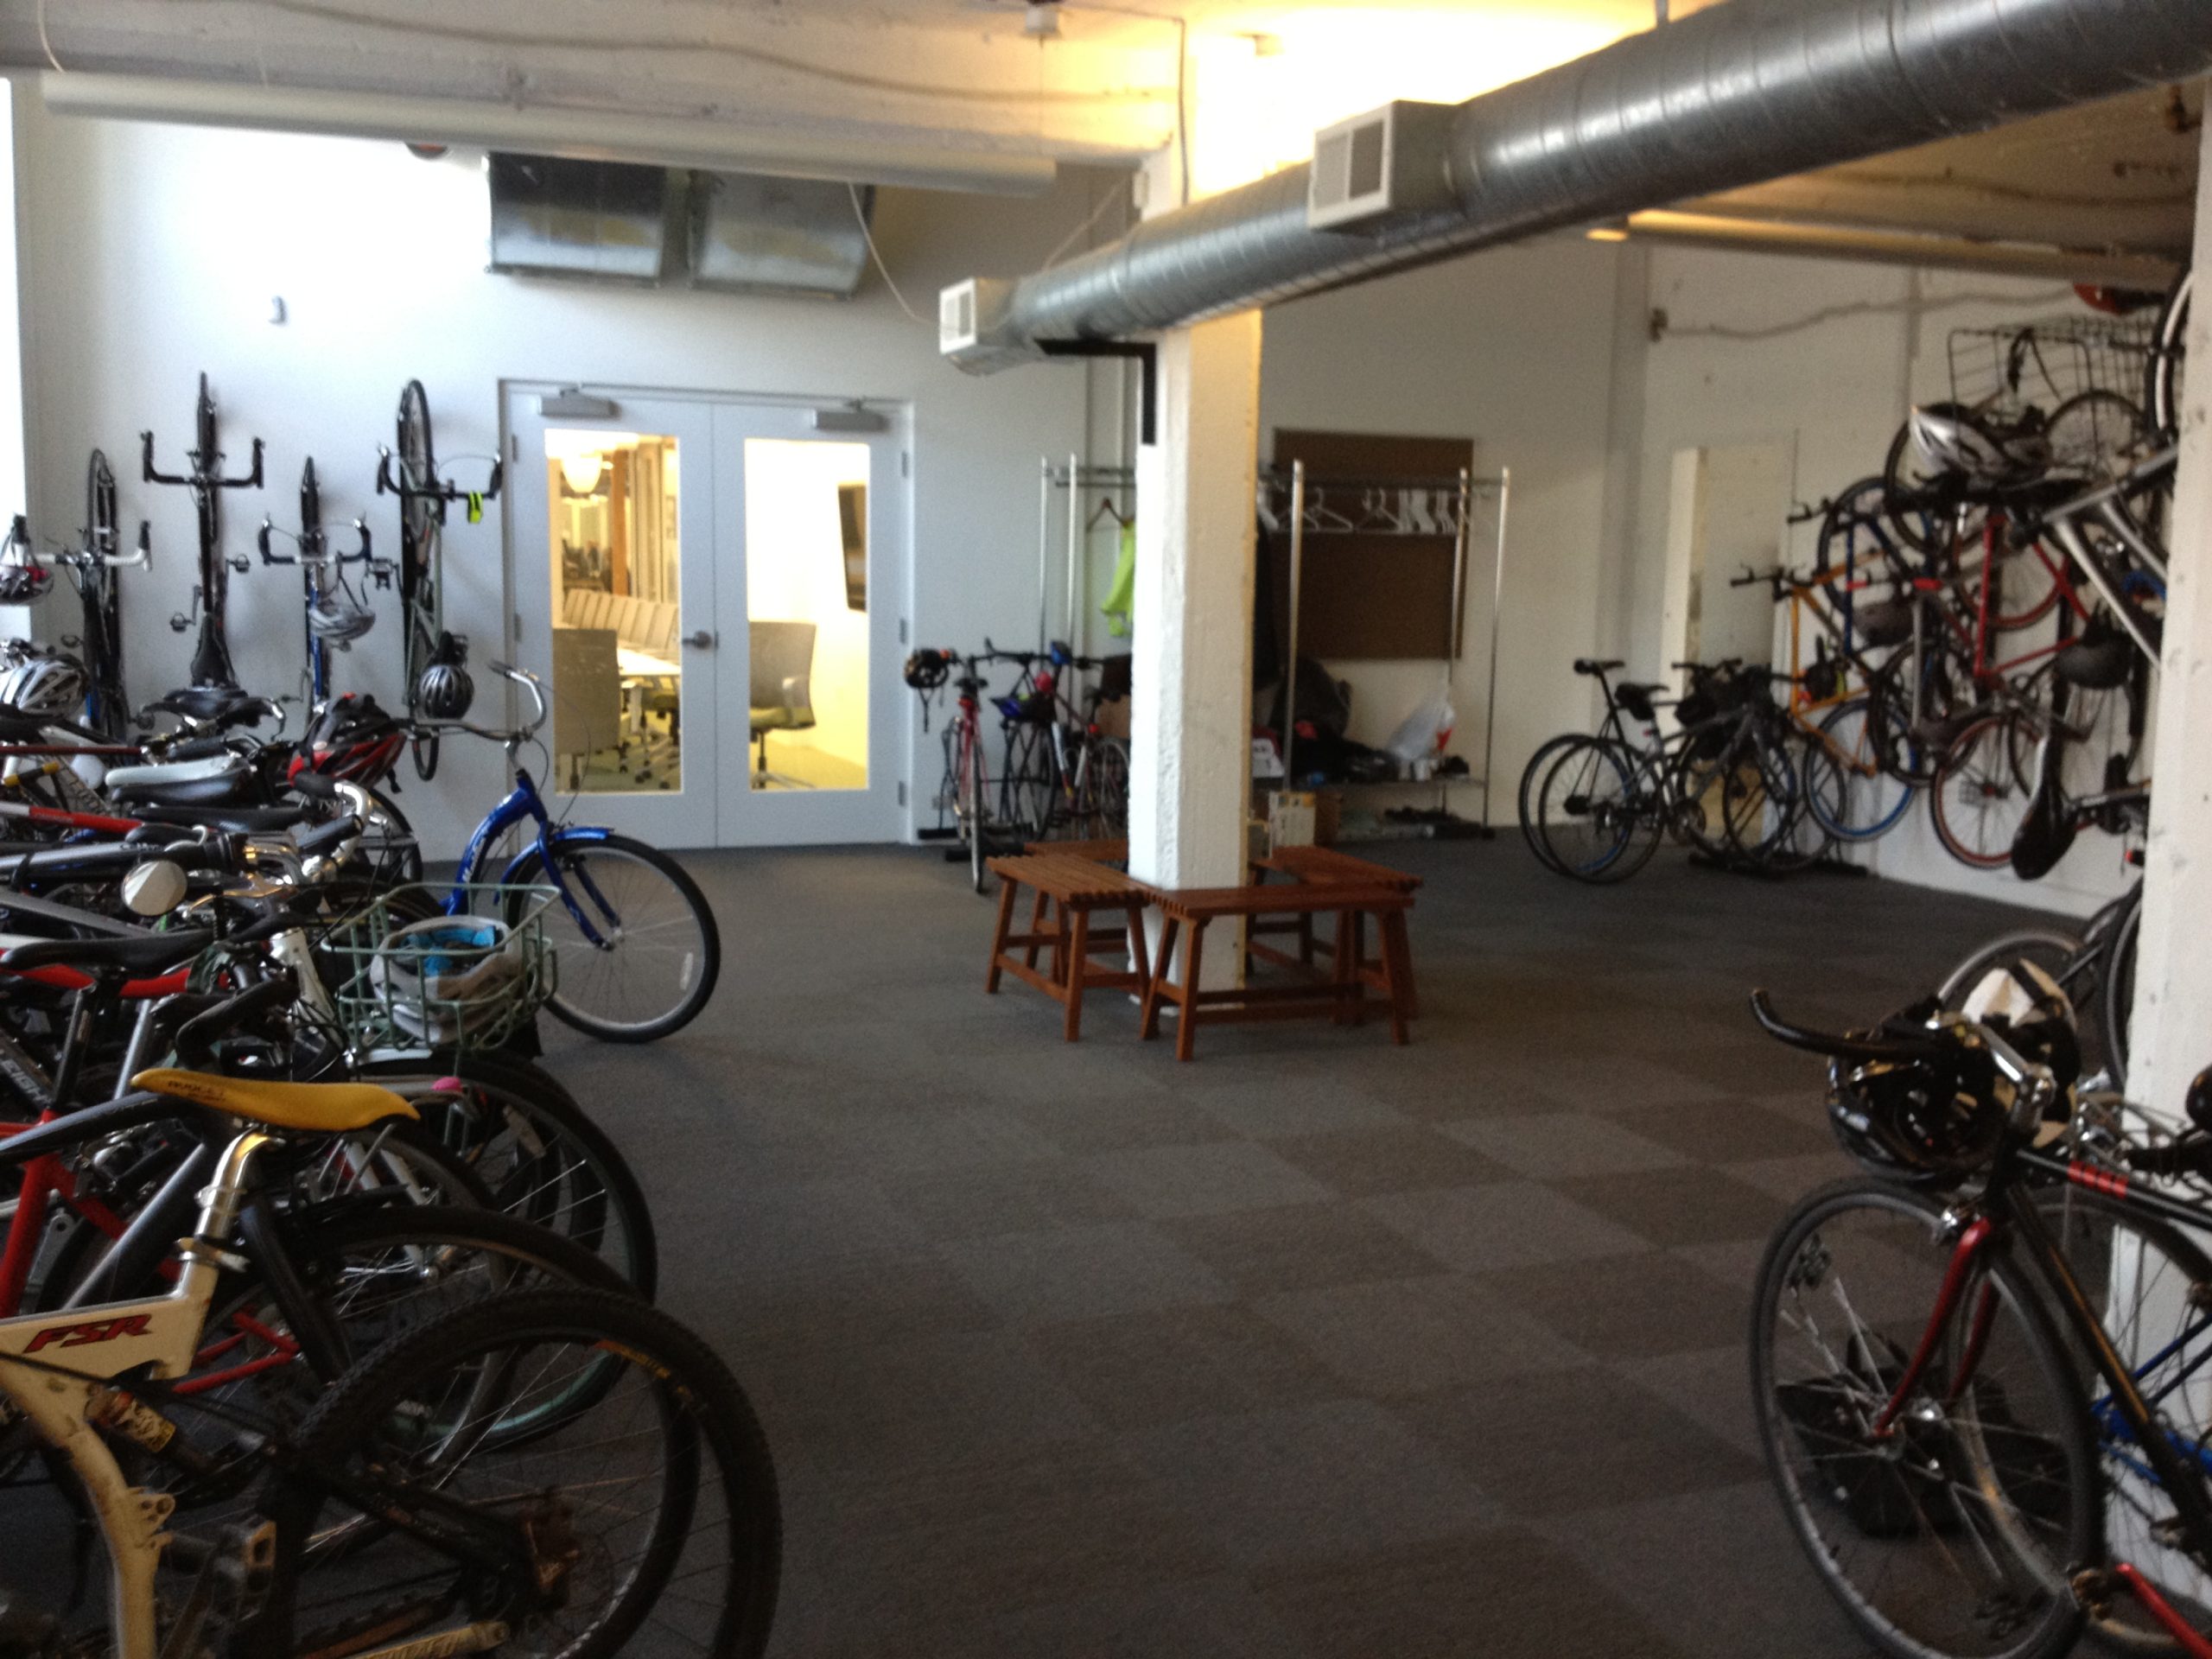 A room hiousing about 30 bikes. Some are on the ground and some are hanging on the walls.